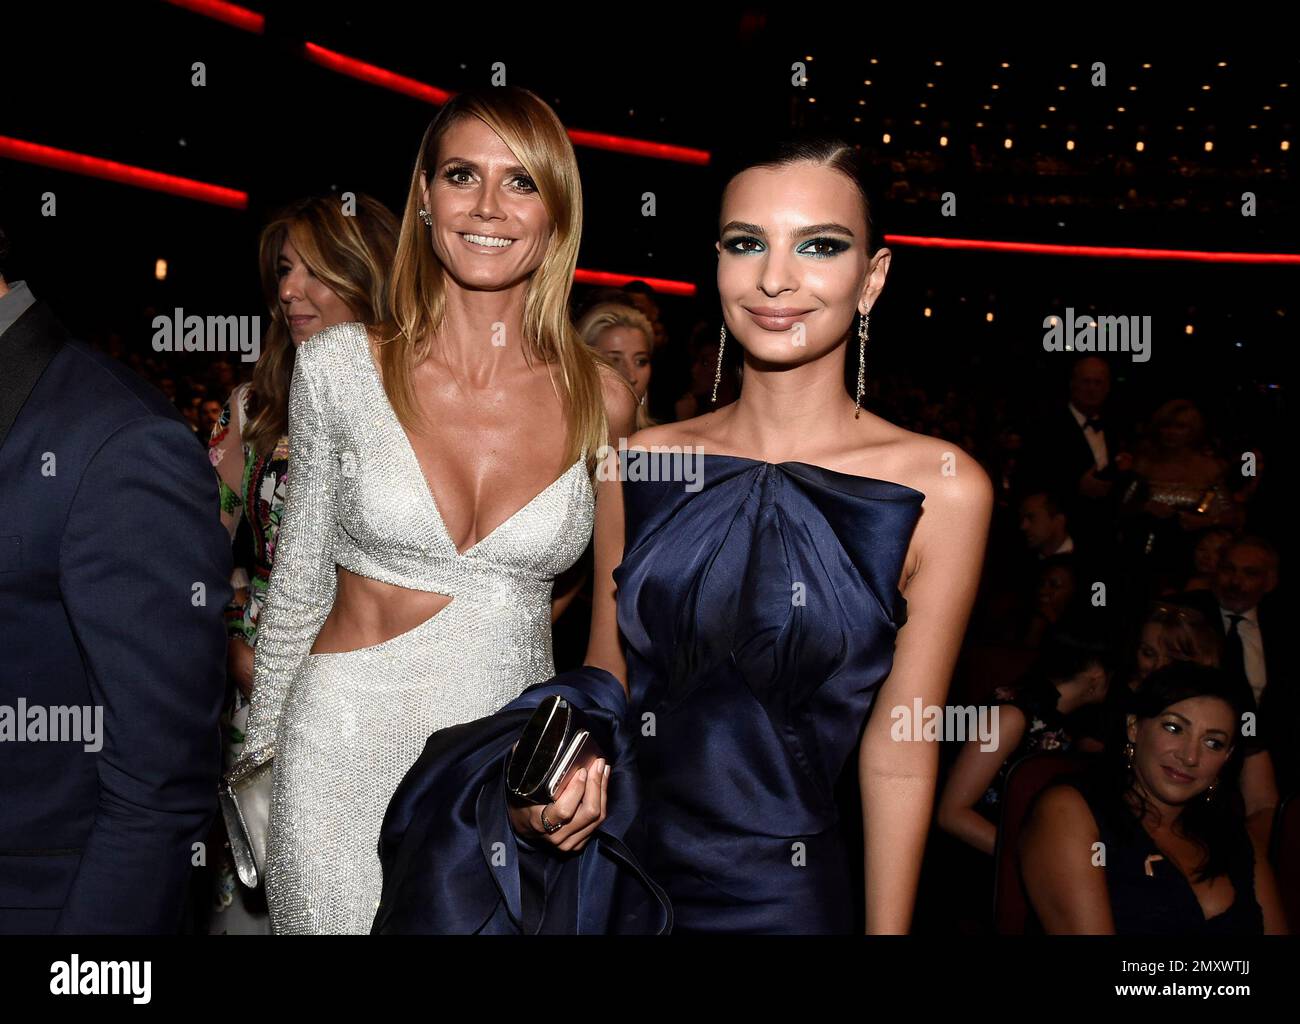 Exclusive Models Heidi Klum Left And Emily Ratajkowski Pose In The Audience At The 68th